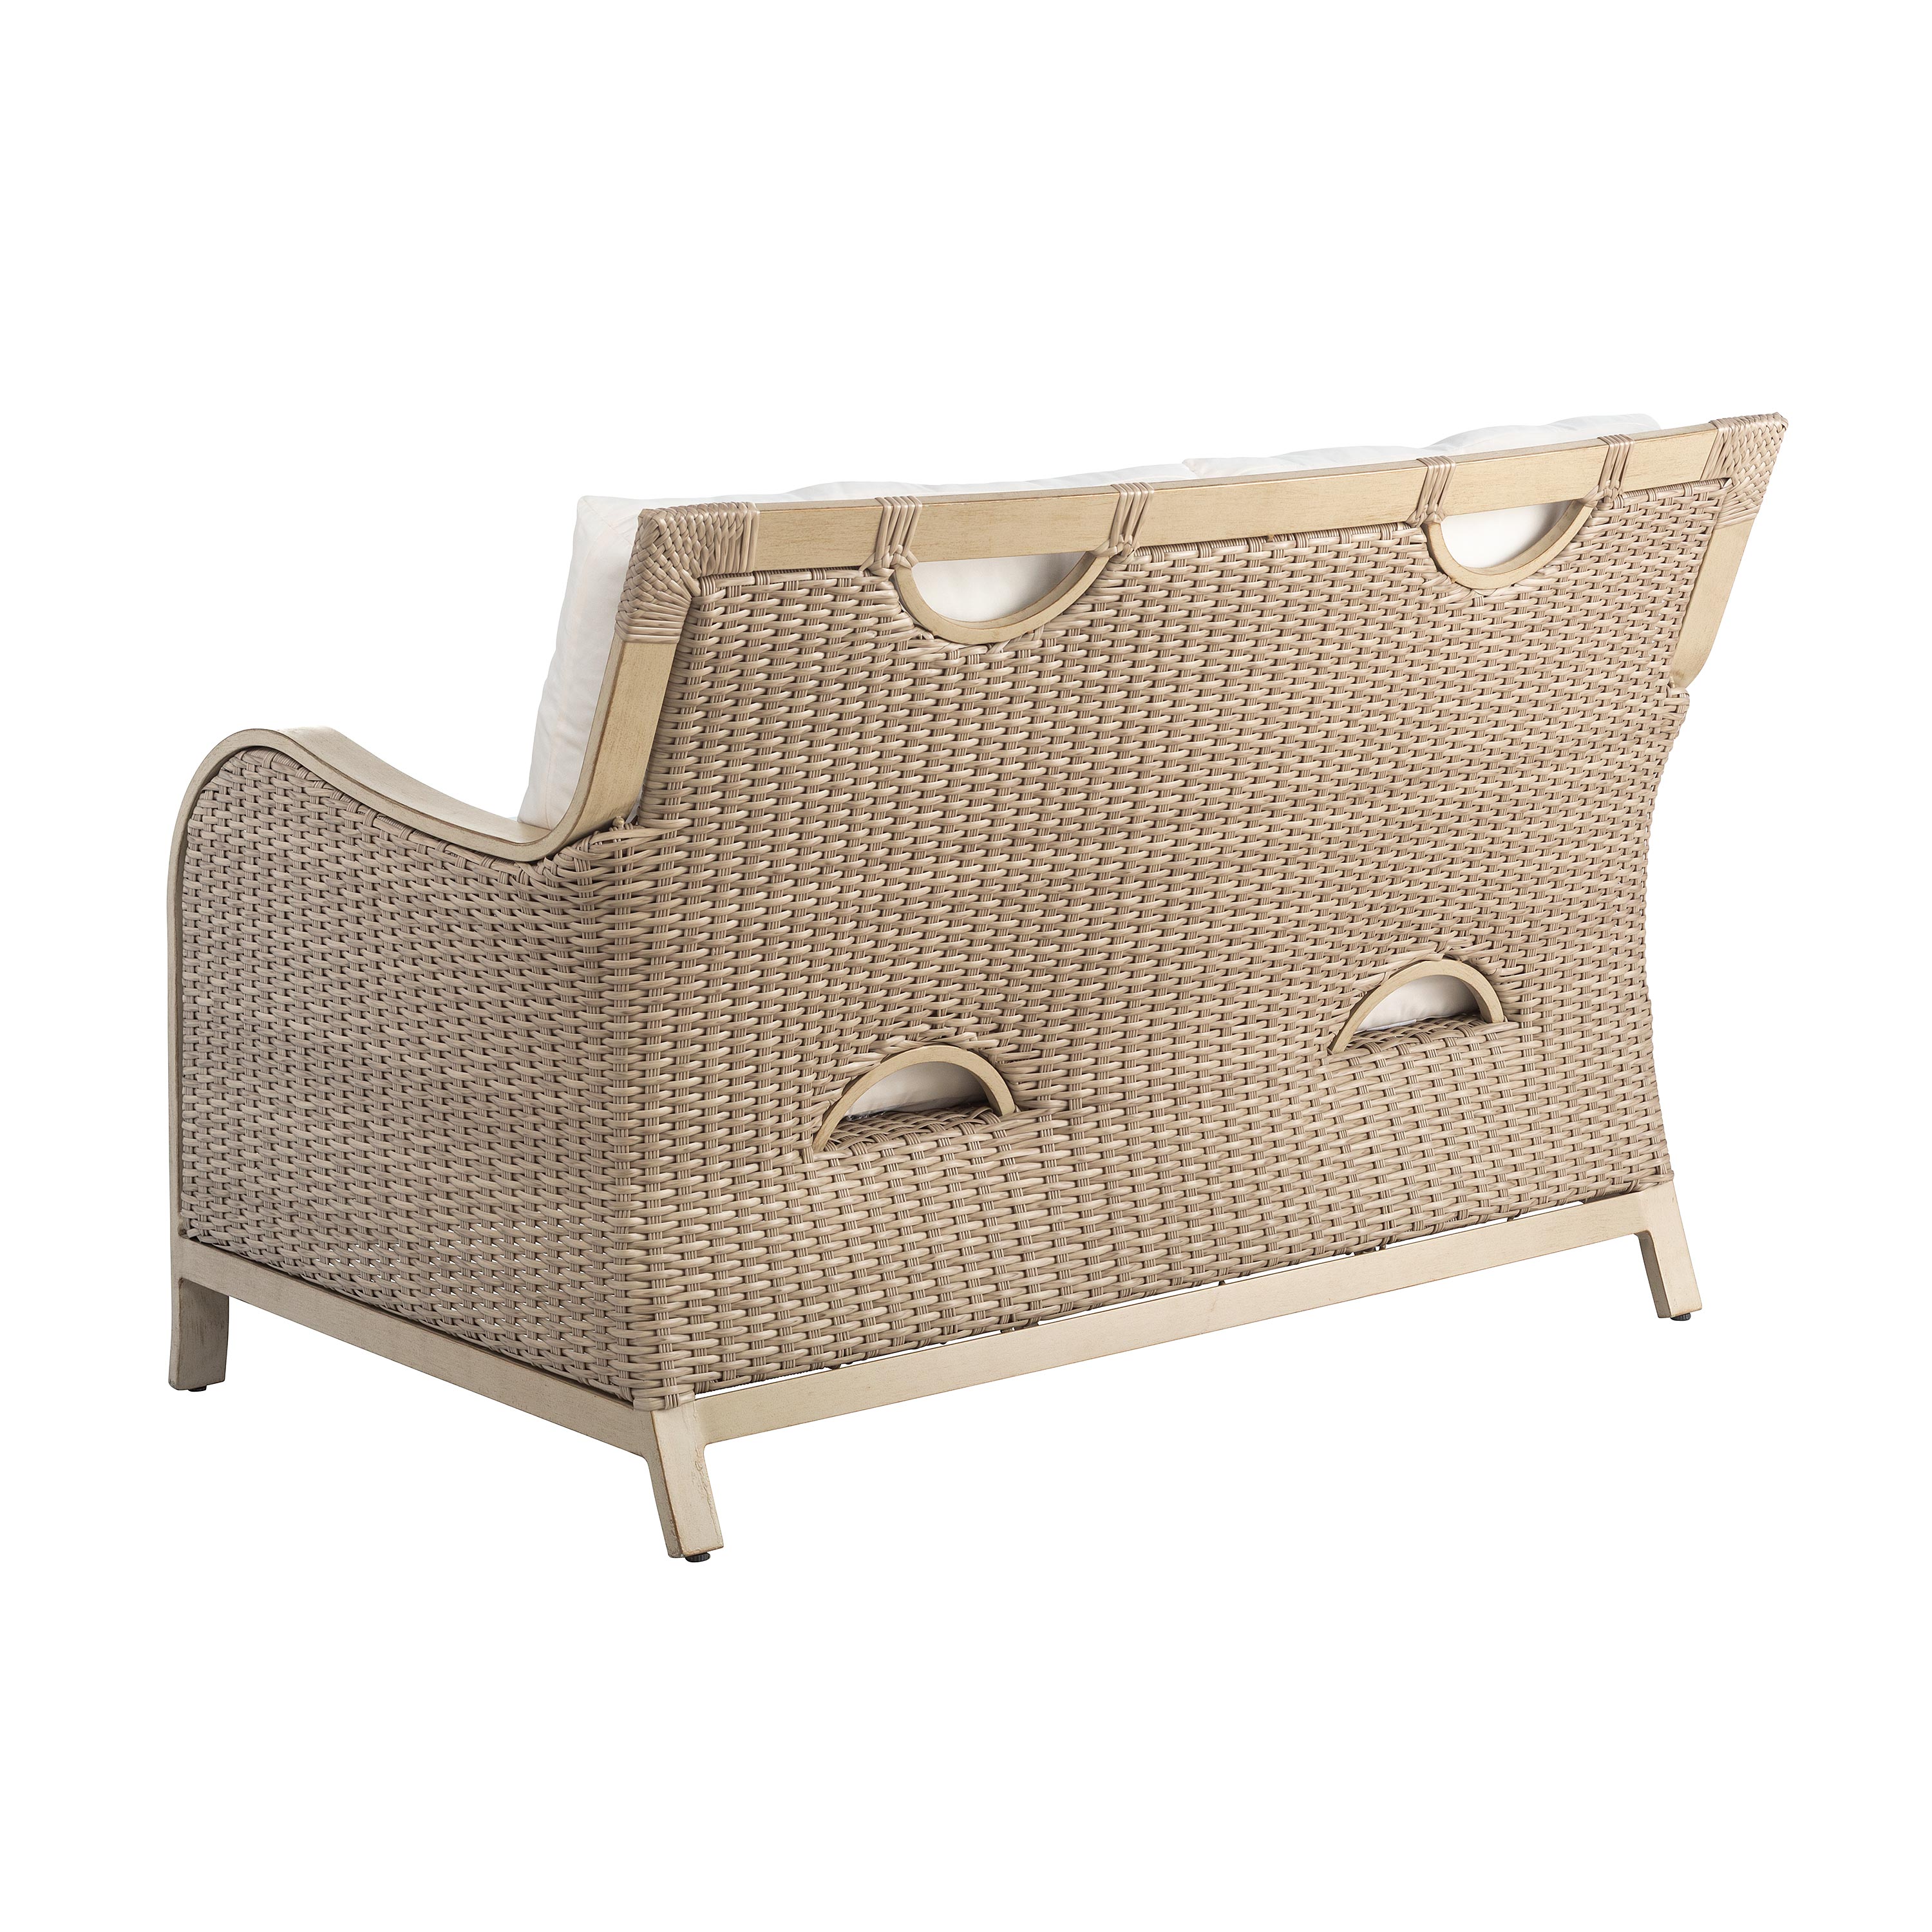 Urbanna Premium Wicker Collection in Driftwood with Luxury Cushions